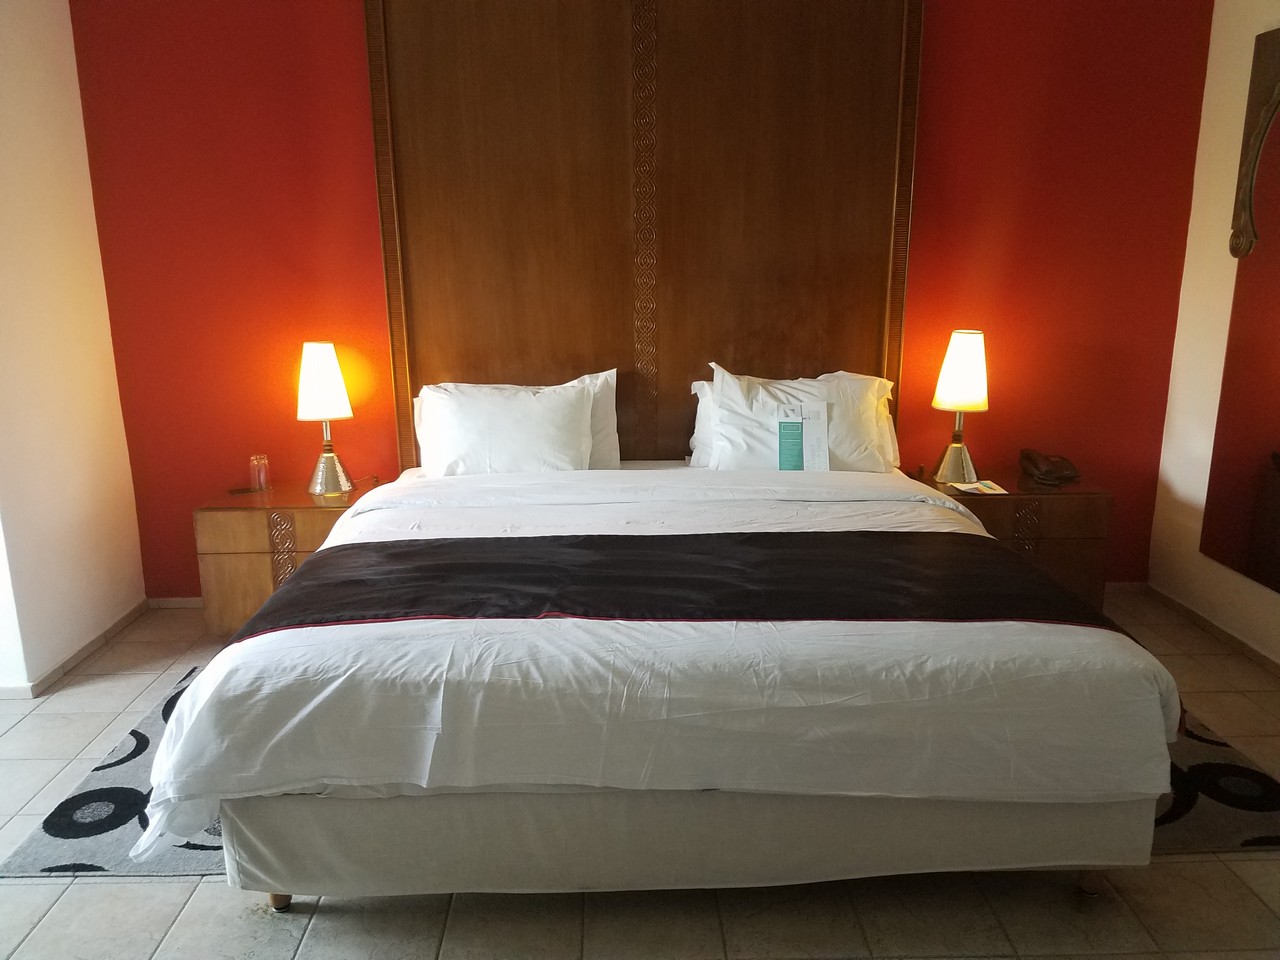 a bed with a wood headboard and lamps